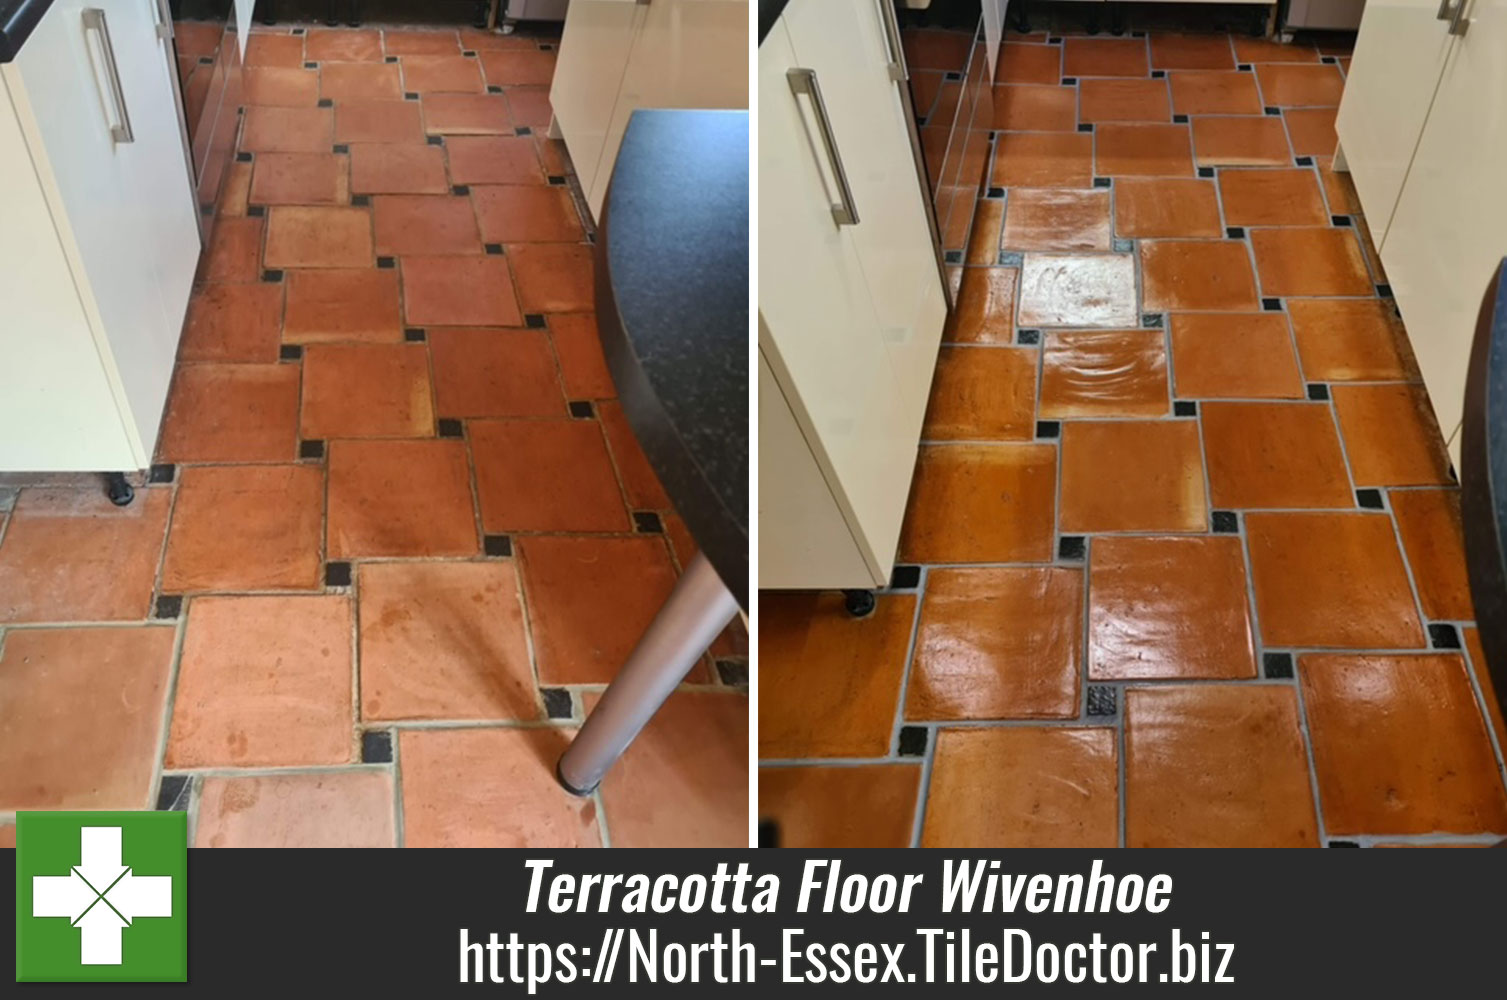 Blending two Terracotta Tiled Floors with Seal and Go Sealer in Wivenhoe North Essex